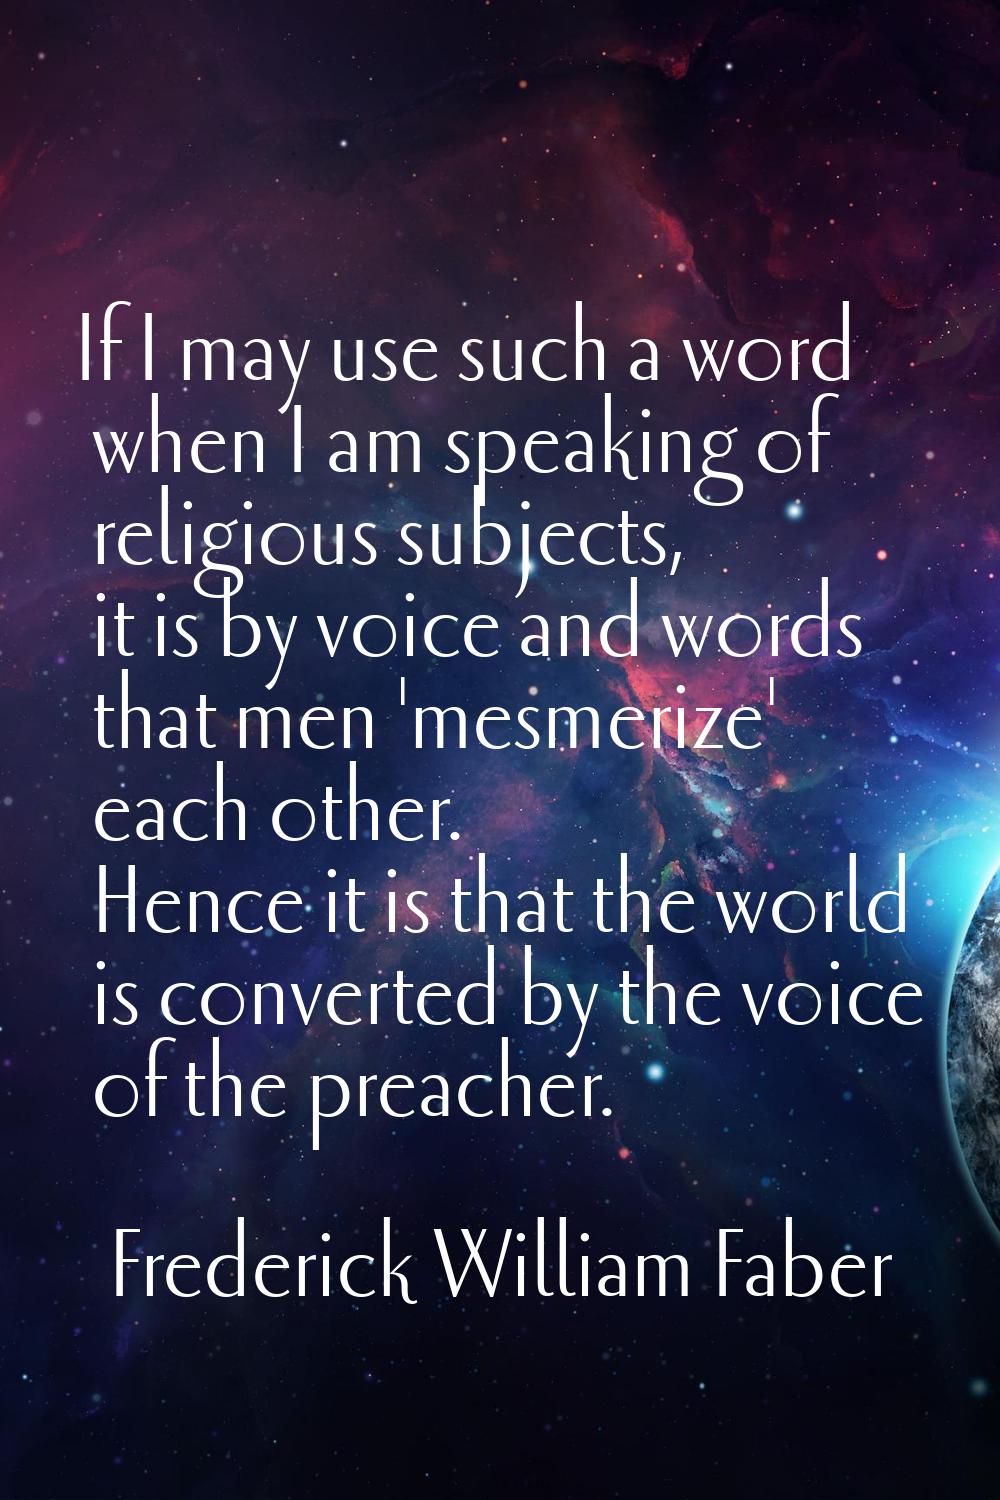 If I may use such a word when I am speaking of religious subjects, it is by voice and words that me